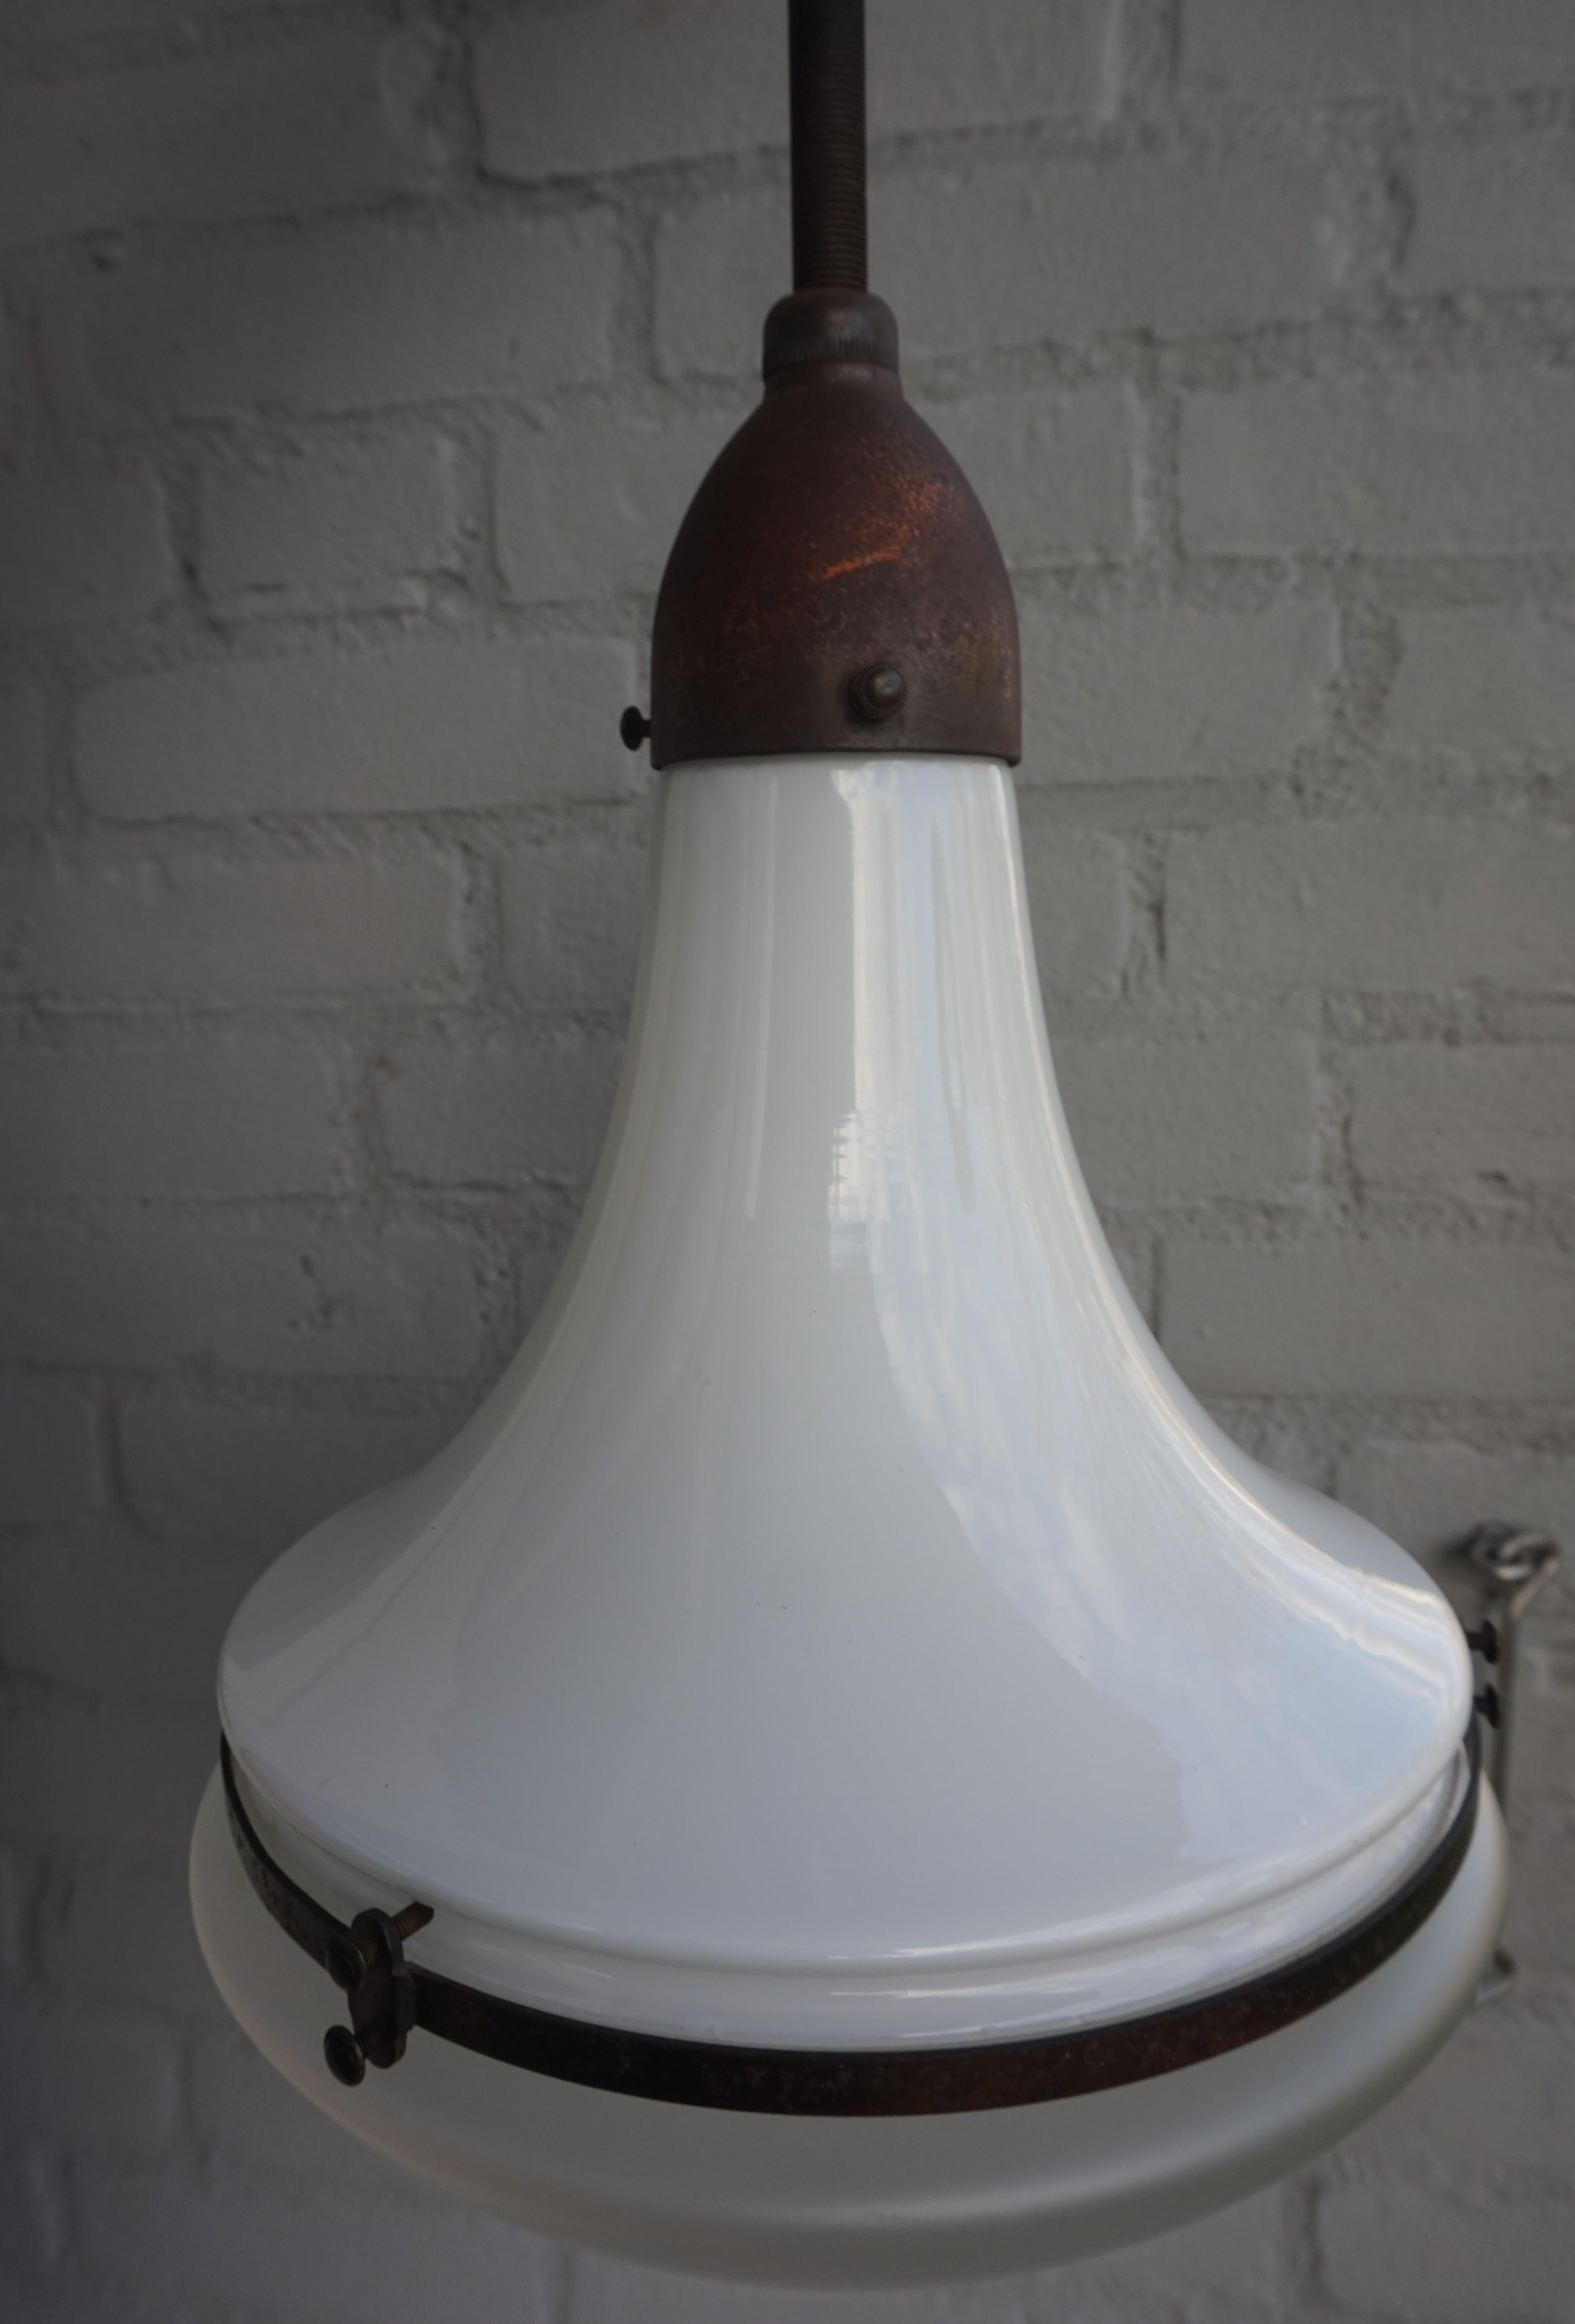 20th Century Superb Condition Industrial Arts & Crafts Pendant Light by Peter Behrens, 1920